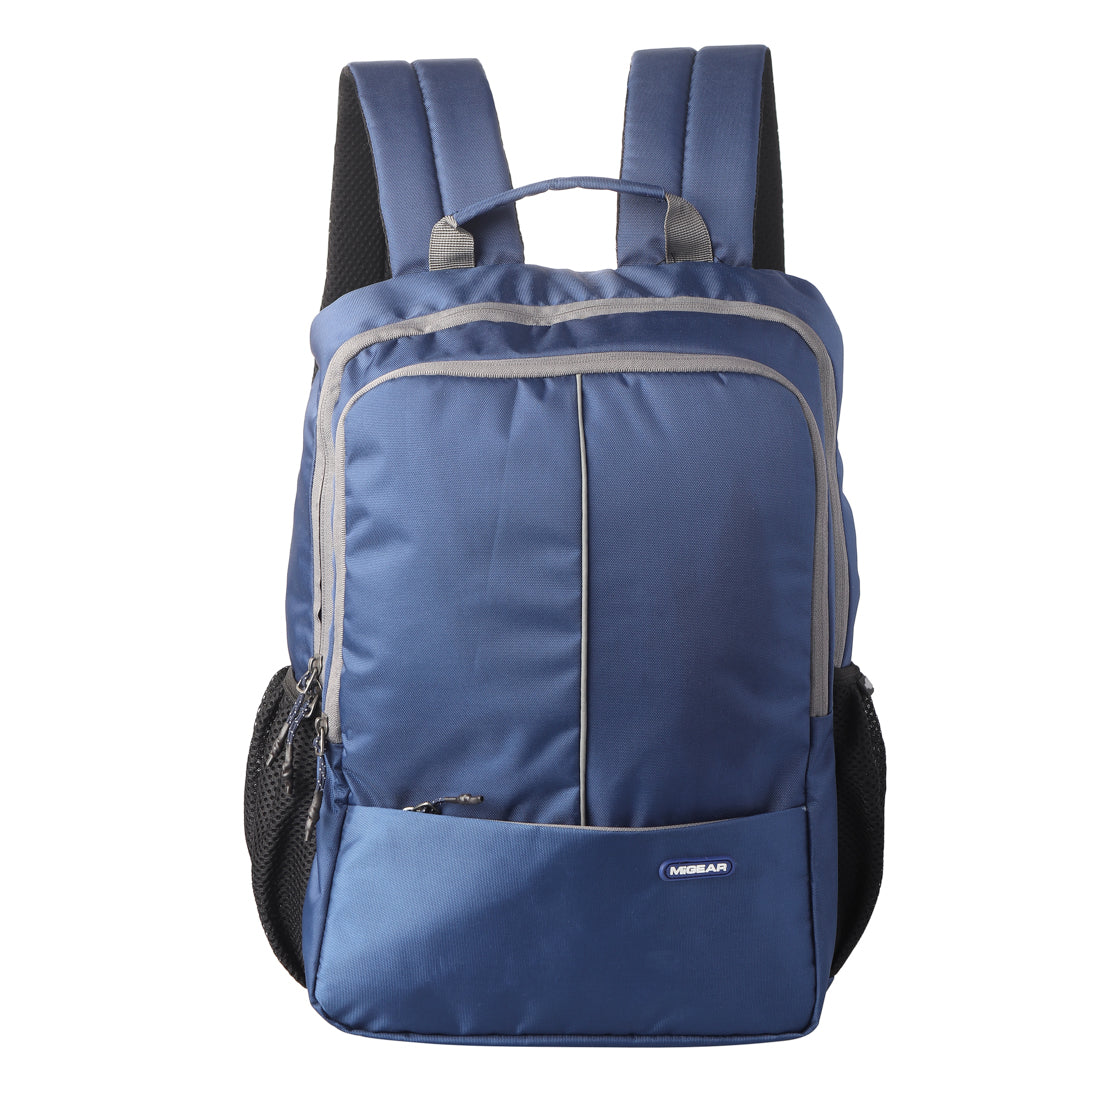 Navy The Calibre Backpack